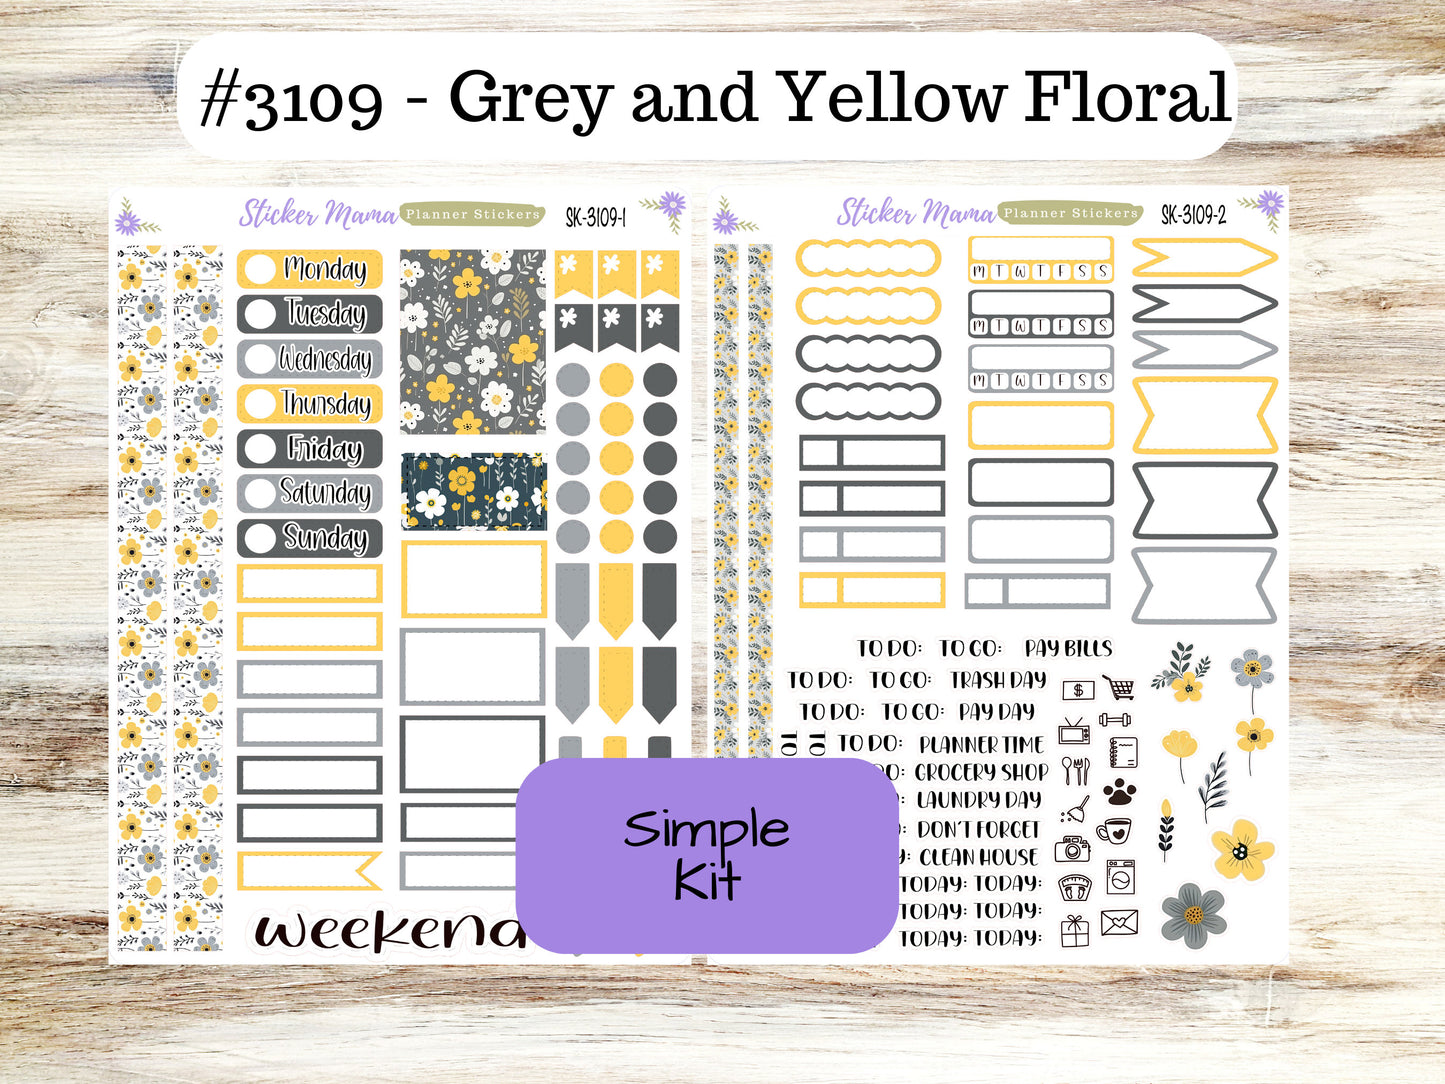 SIMPLE KIT  || #3109 || Grey and Yellow Floral  || Any Kind Planner || Planner Stickers || Planner Stickers